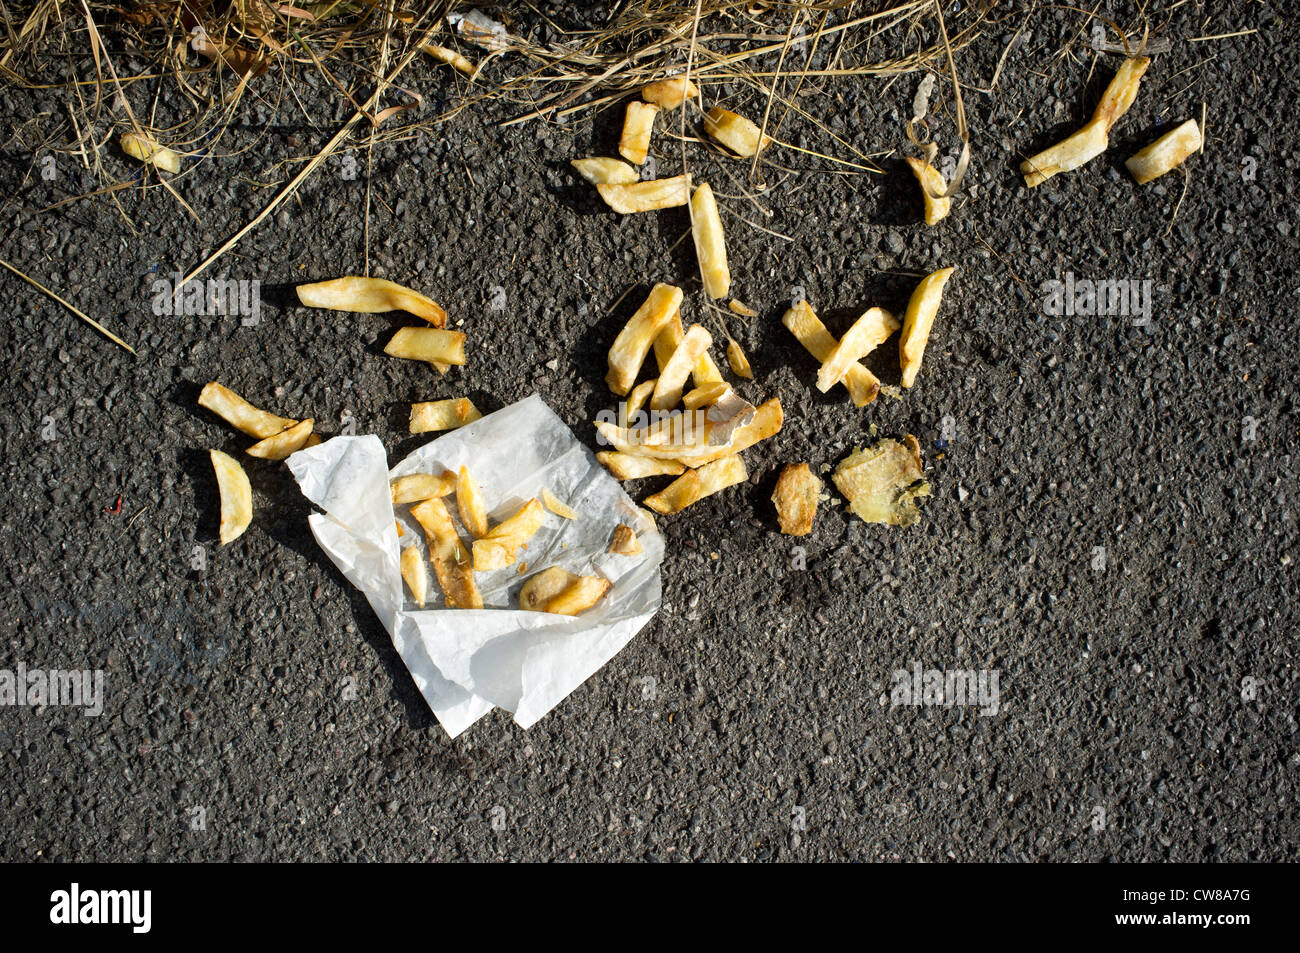 Discarded chips and wrapper Stock Photo